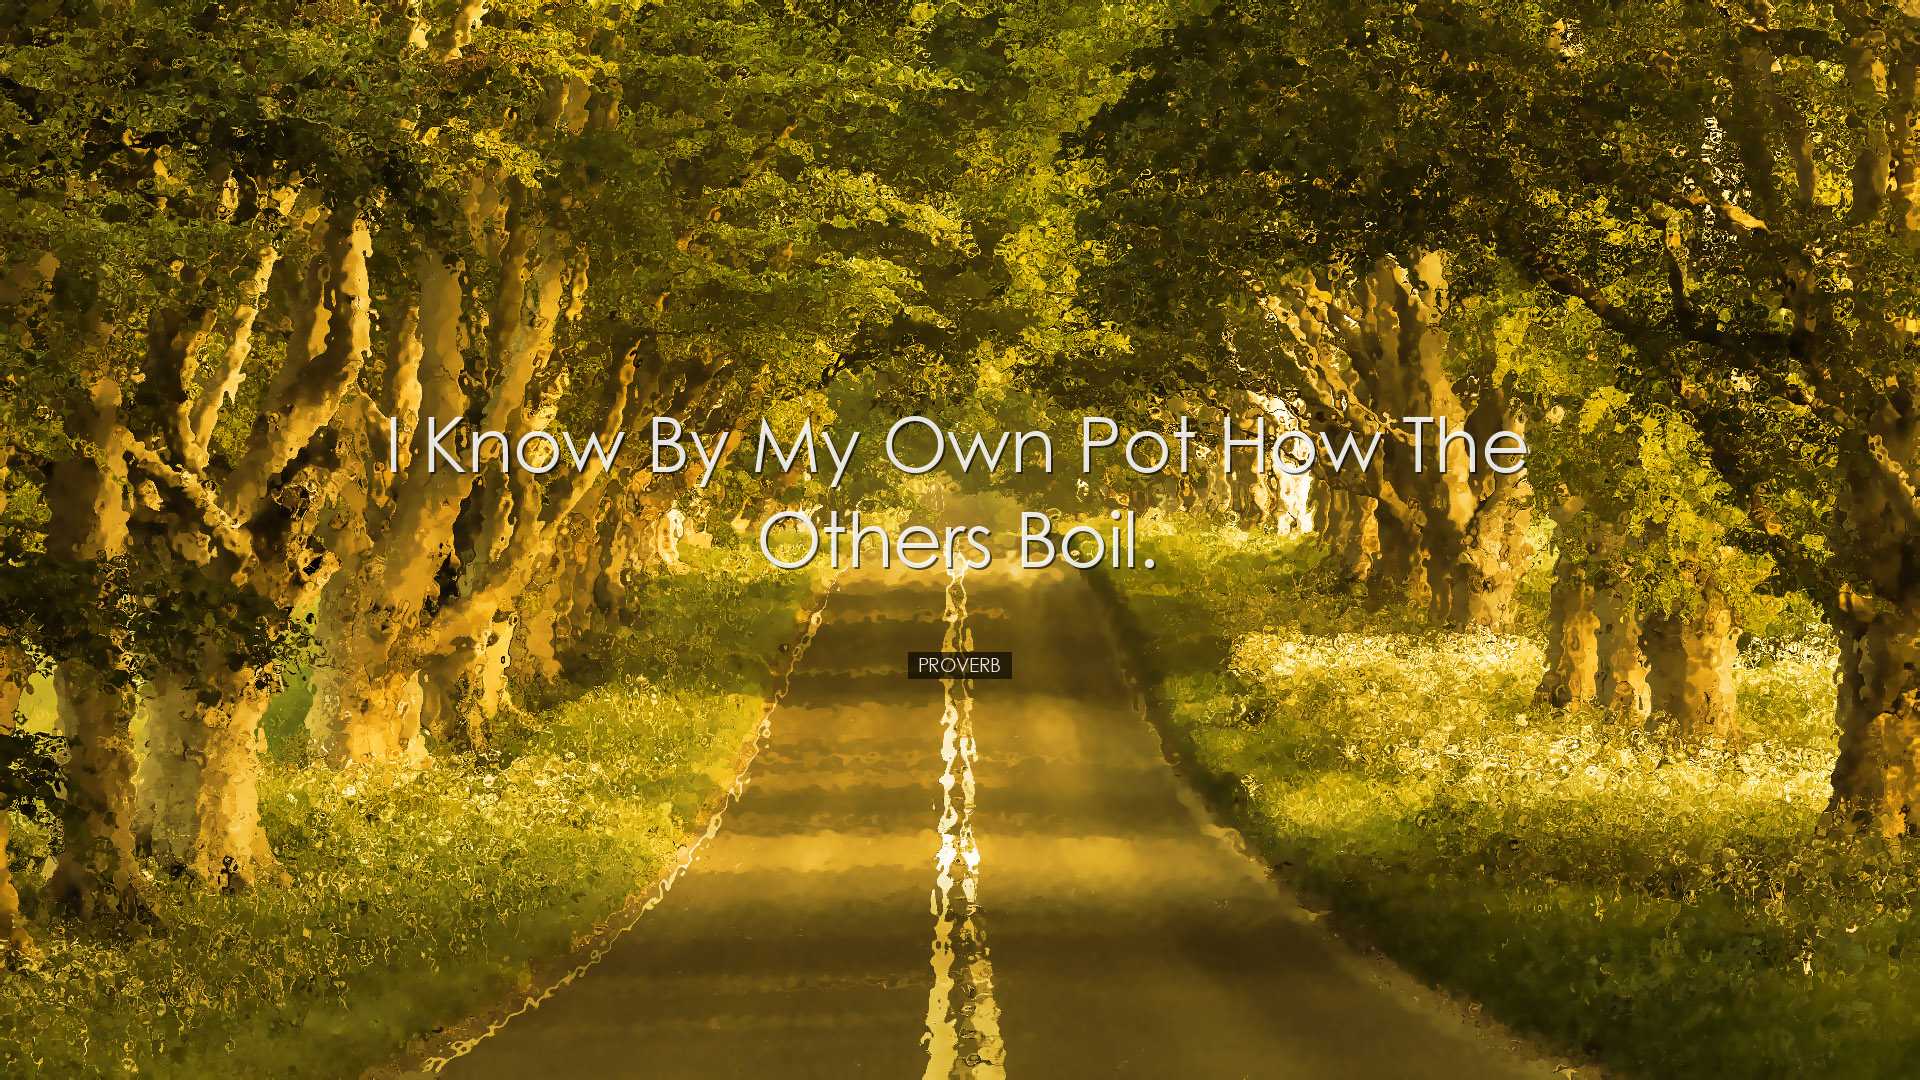 I know by my own pot how the others boil. - Proverb